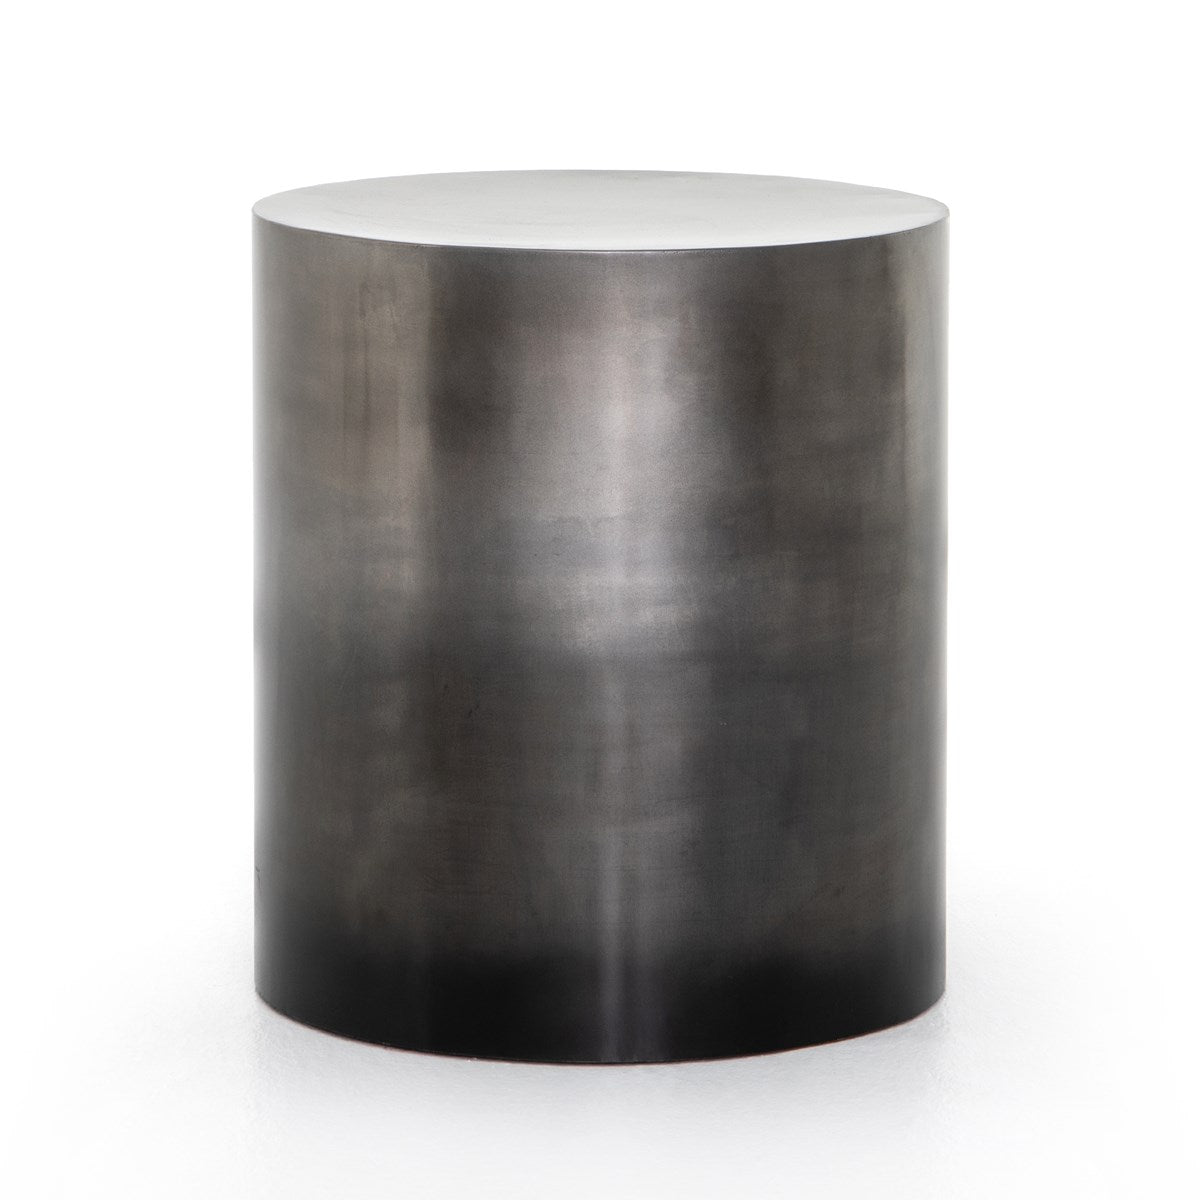 Cameron Ombre End Table Ombre PewterTable Four Hands  Ombre Pewter   Four Hands, Burke Decor, Mid Century Modern Furniture, Old Bones Furniture Company, Old Bones Co, Modern Mid Century, Designer Furniture, https://www.oldbonesco.com/